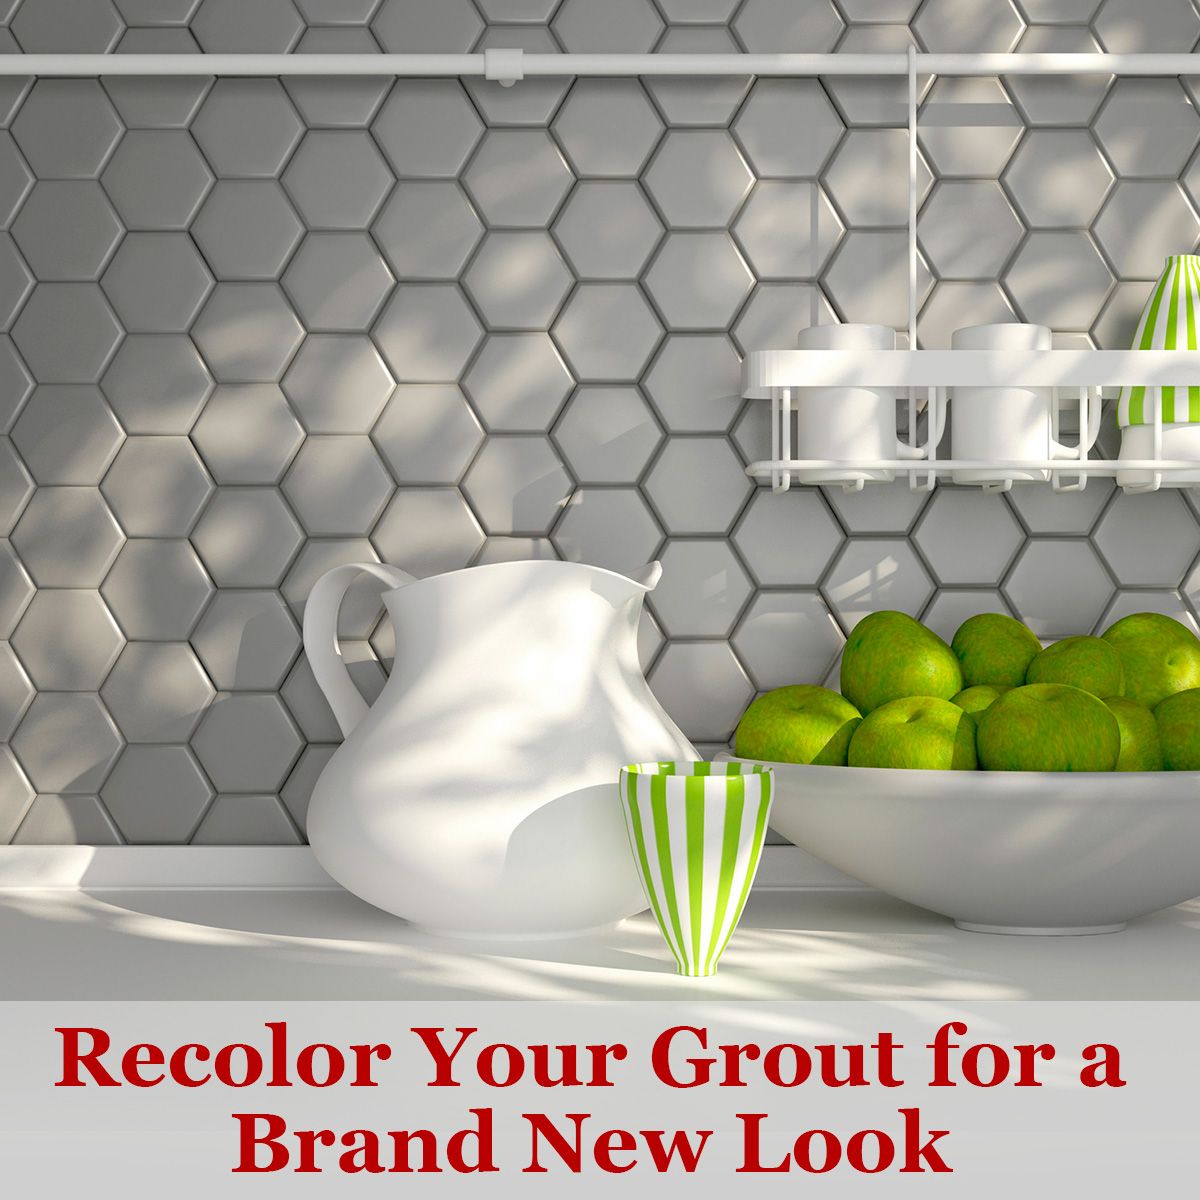 Recolor Your Grout for a Brand New Look